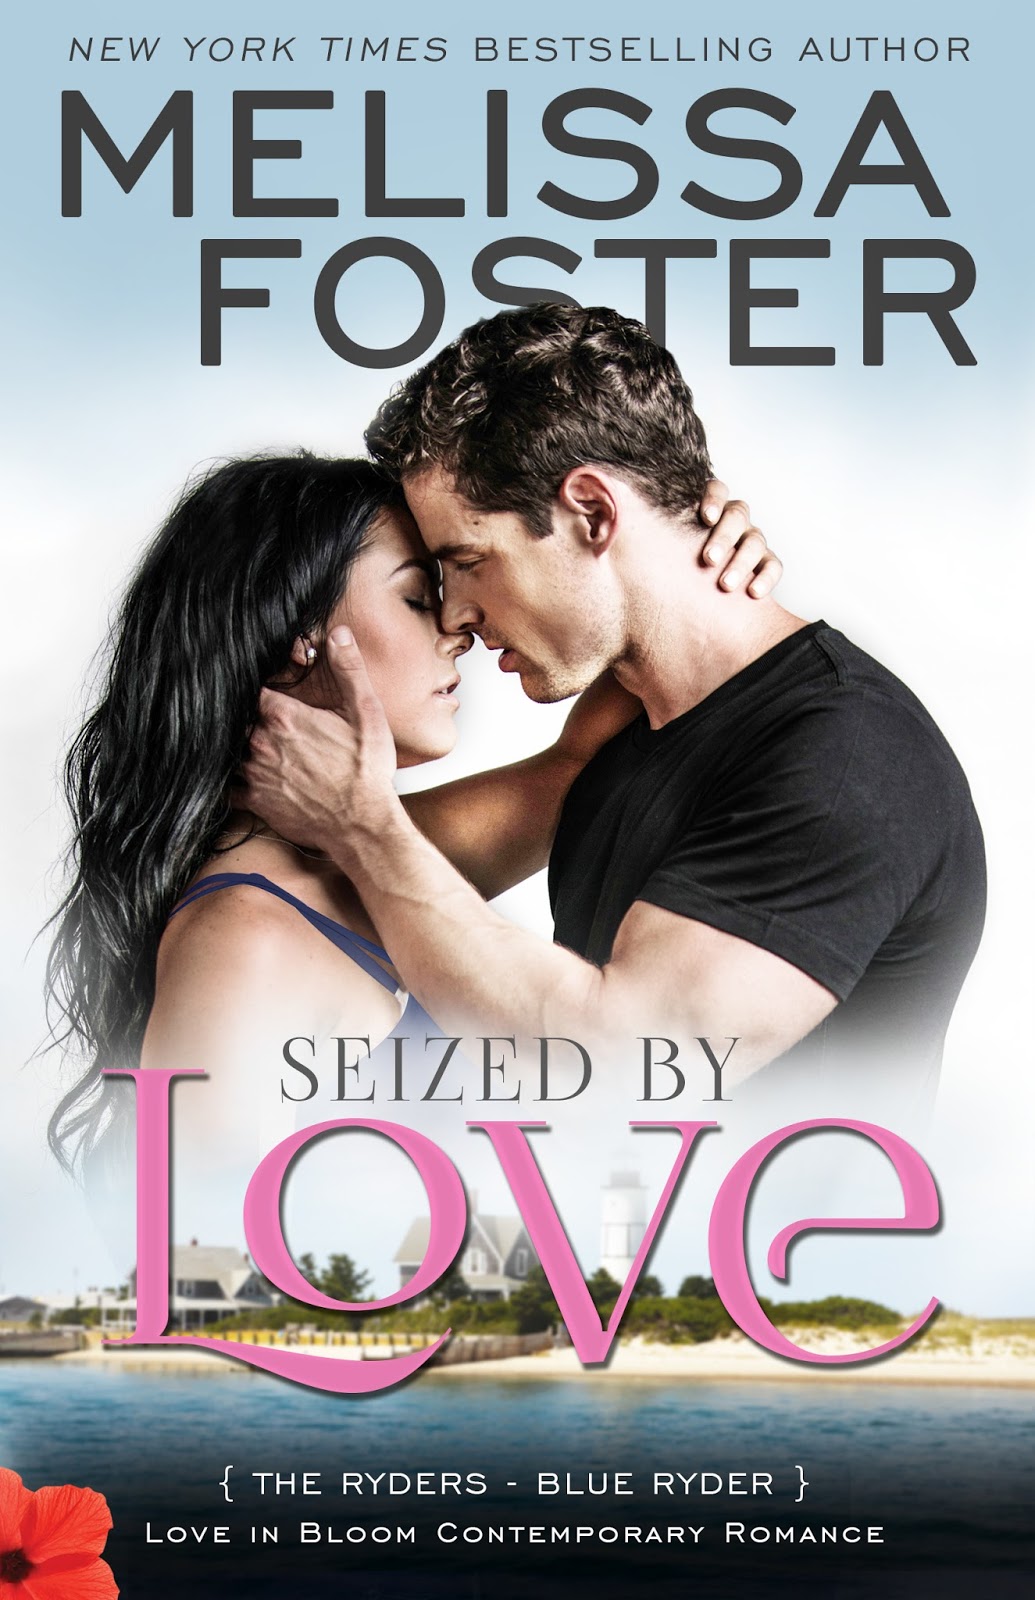 Claimed by Love by Melissa Foster Book Spotlight